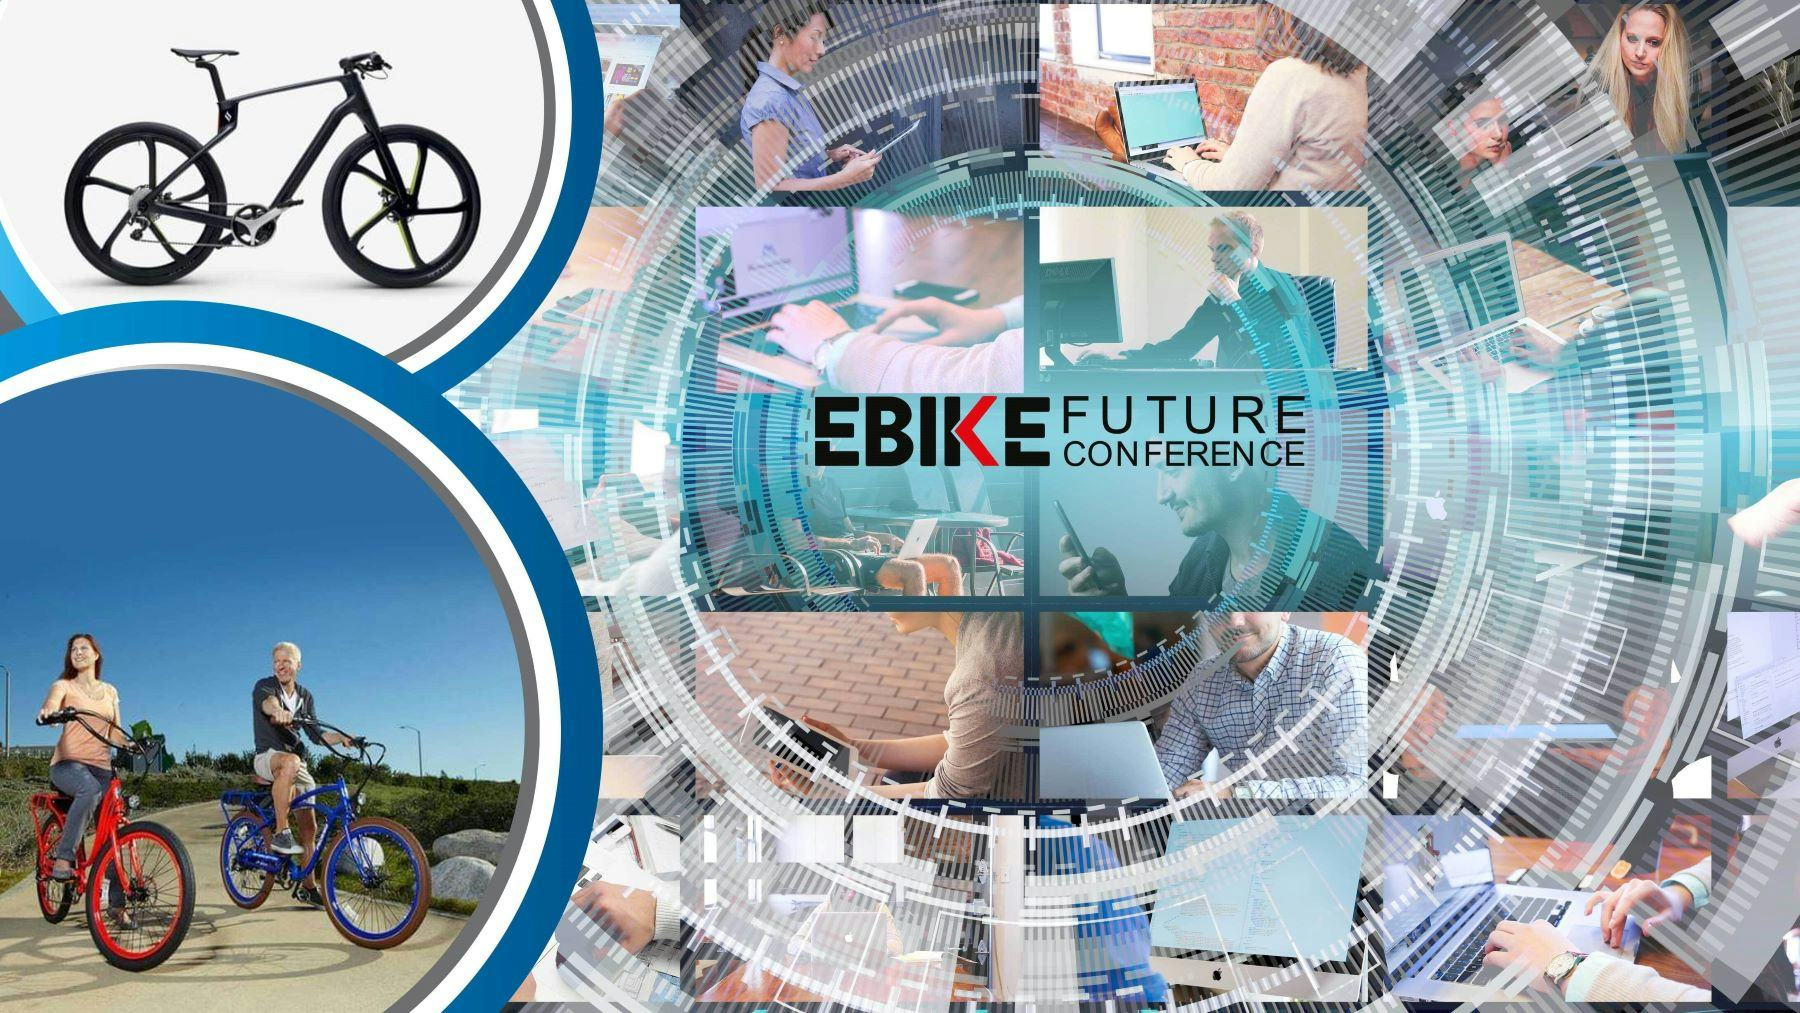 The Ebike Future Conference will be held from 11 to 13 October. – Photo Ebike Future Conference